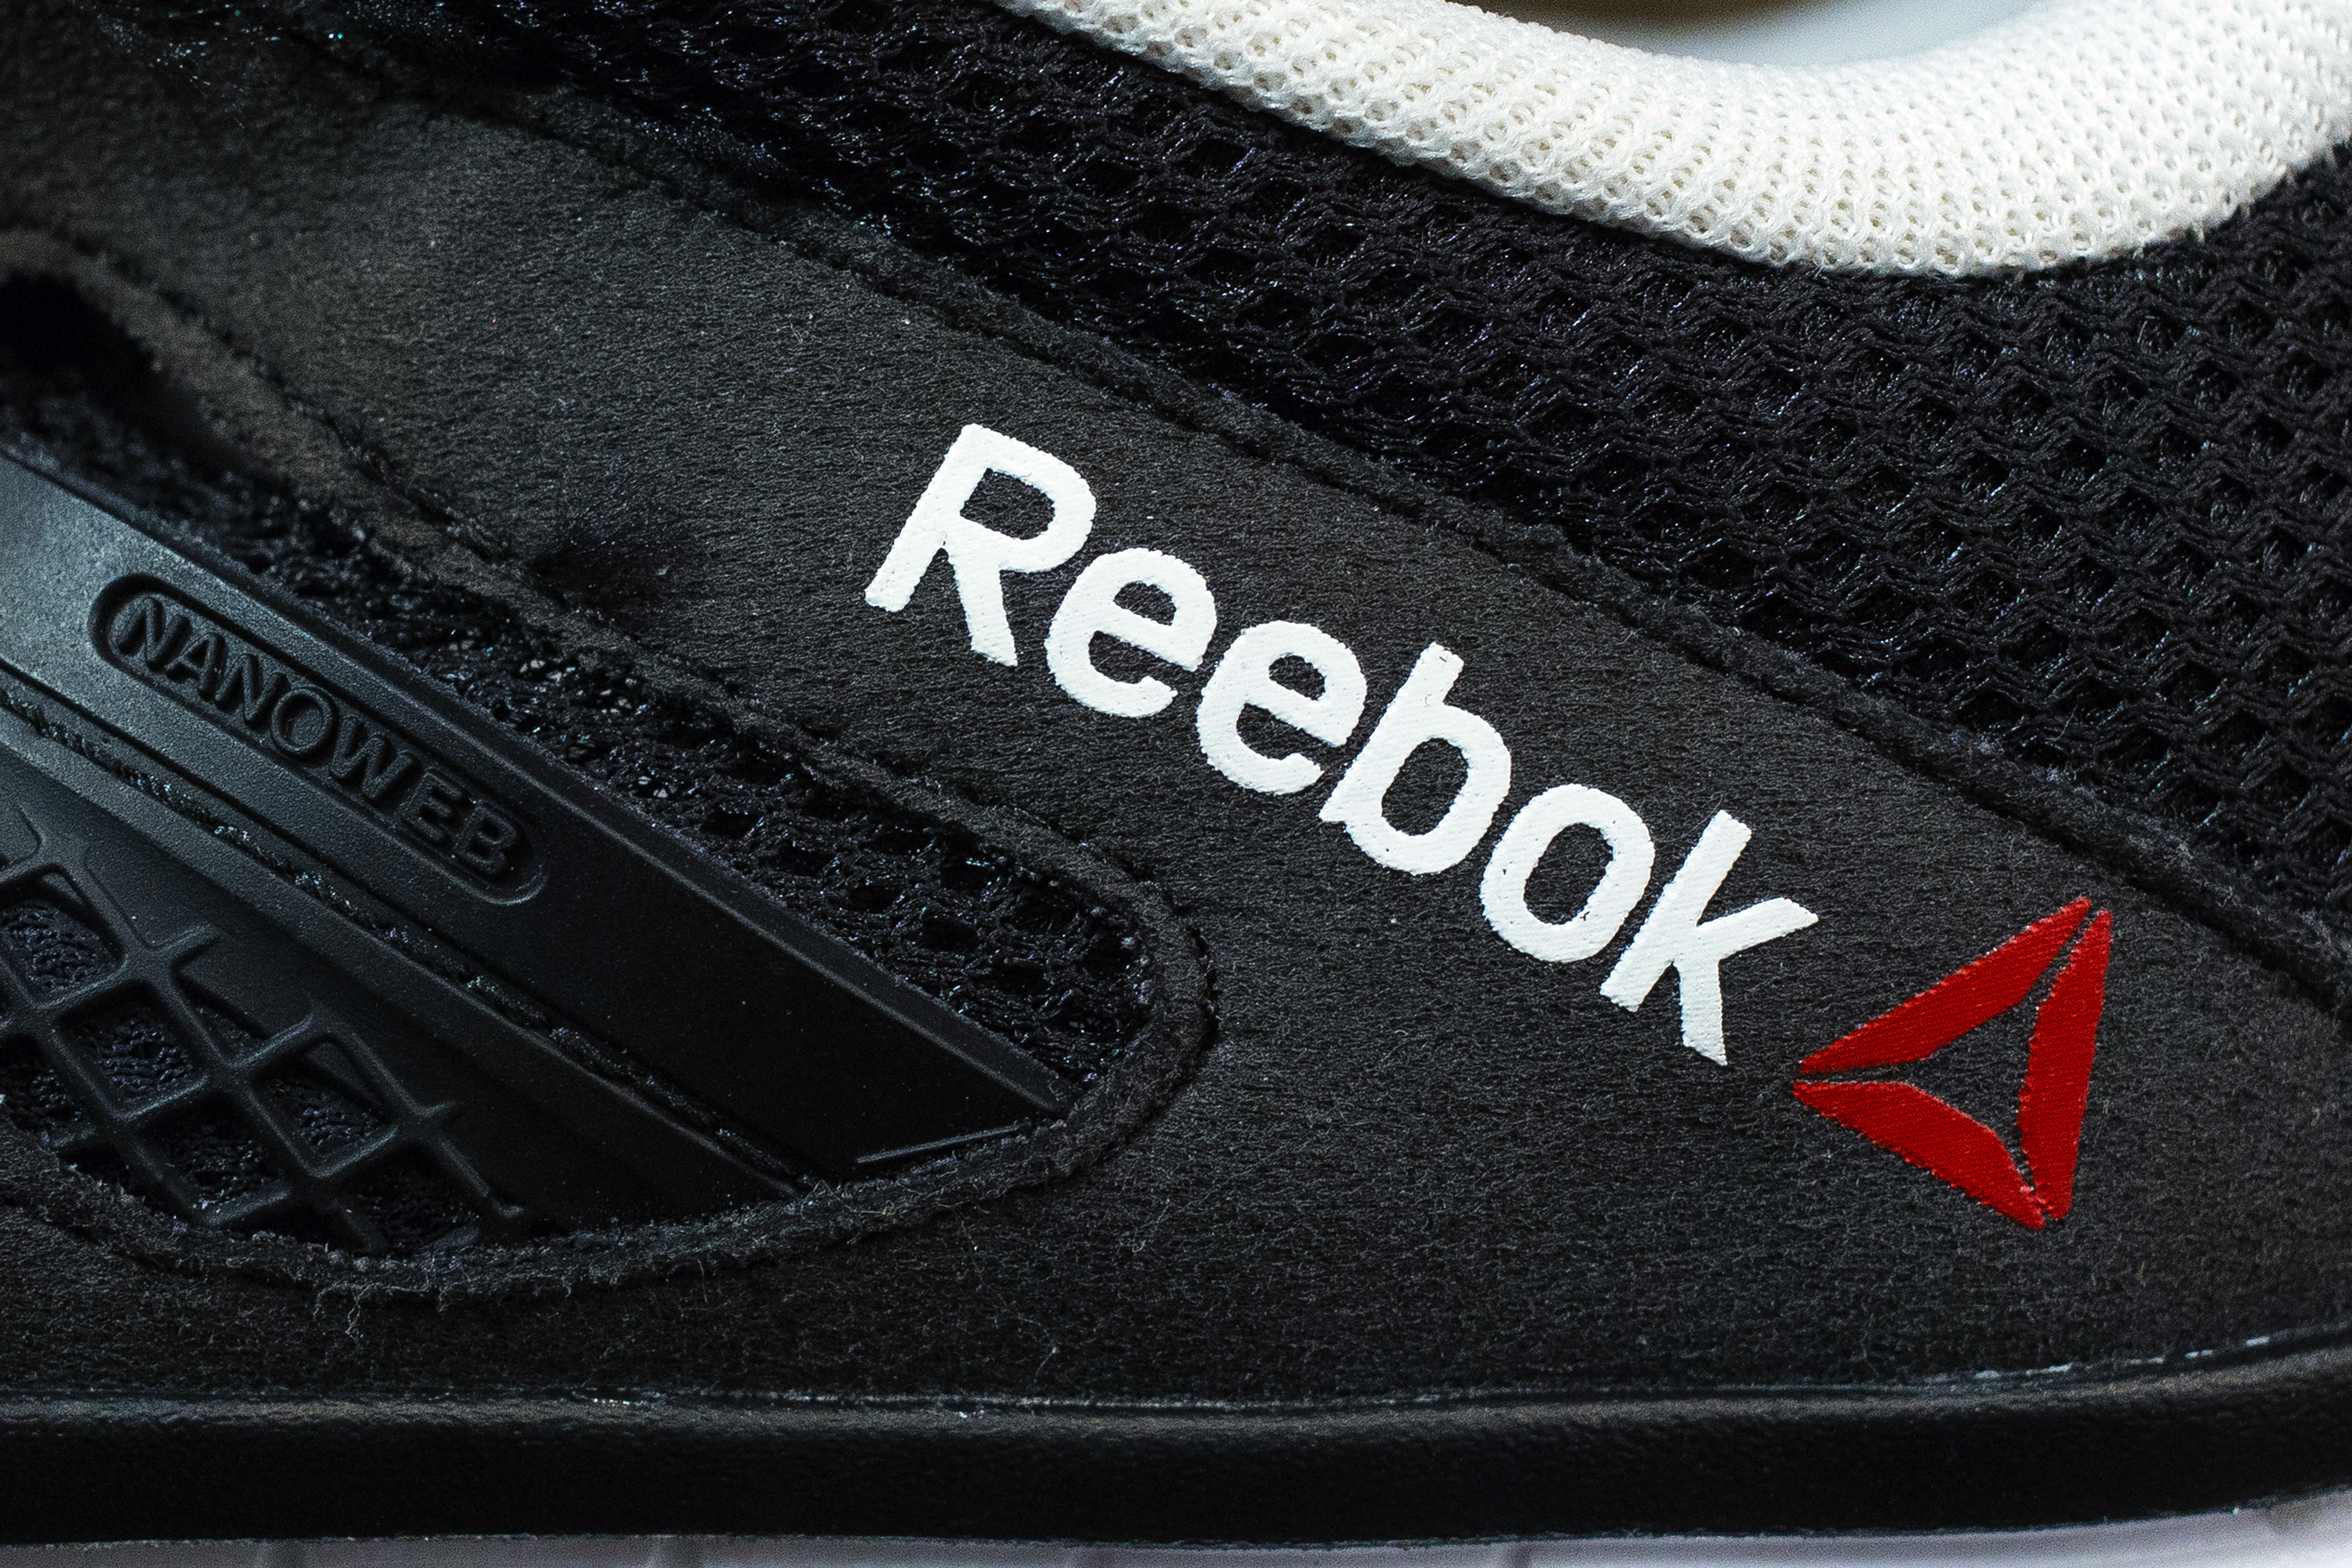 Reebok Pump: Meet the Man Who Invented It 